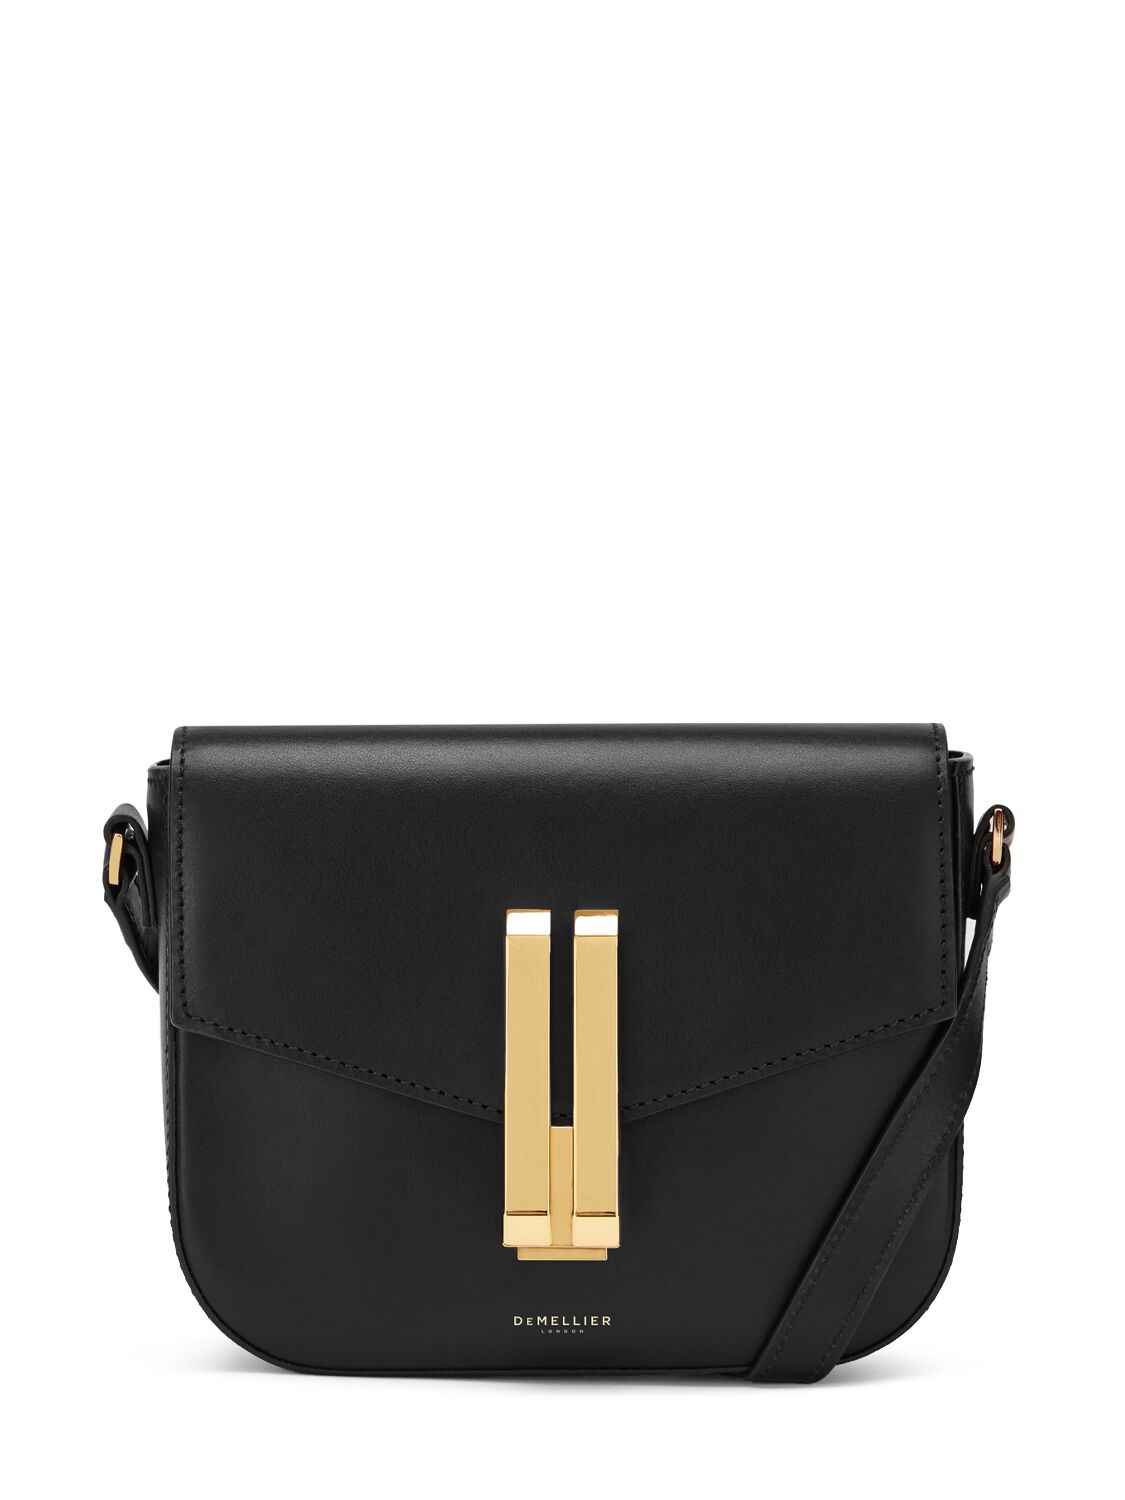 Demellier Small Vancouver Smooth Leather Bag In Black Smooth